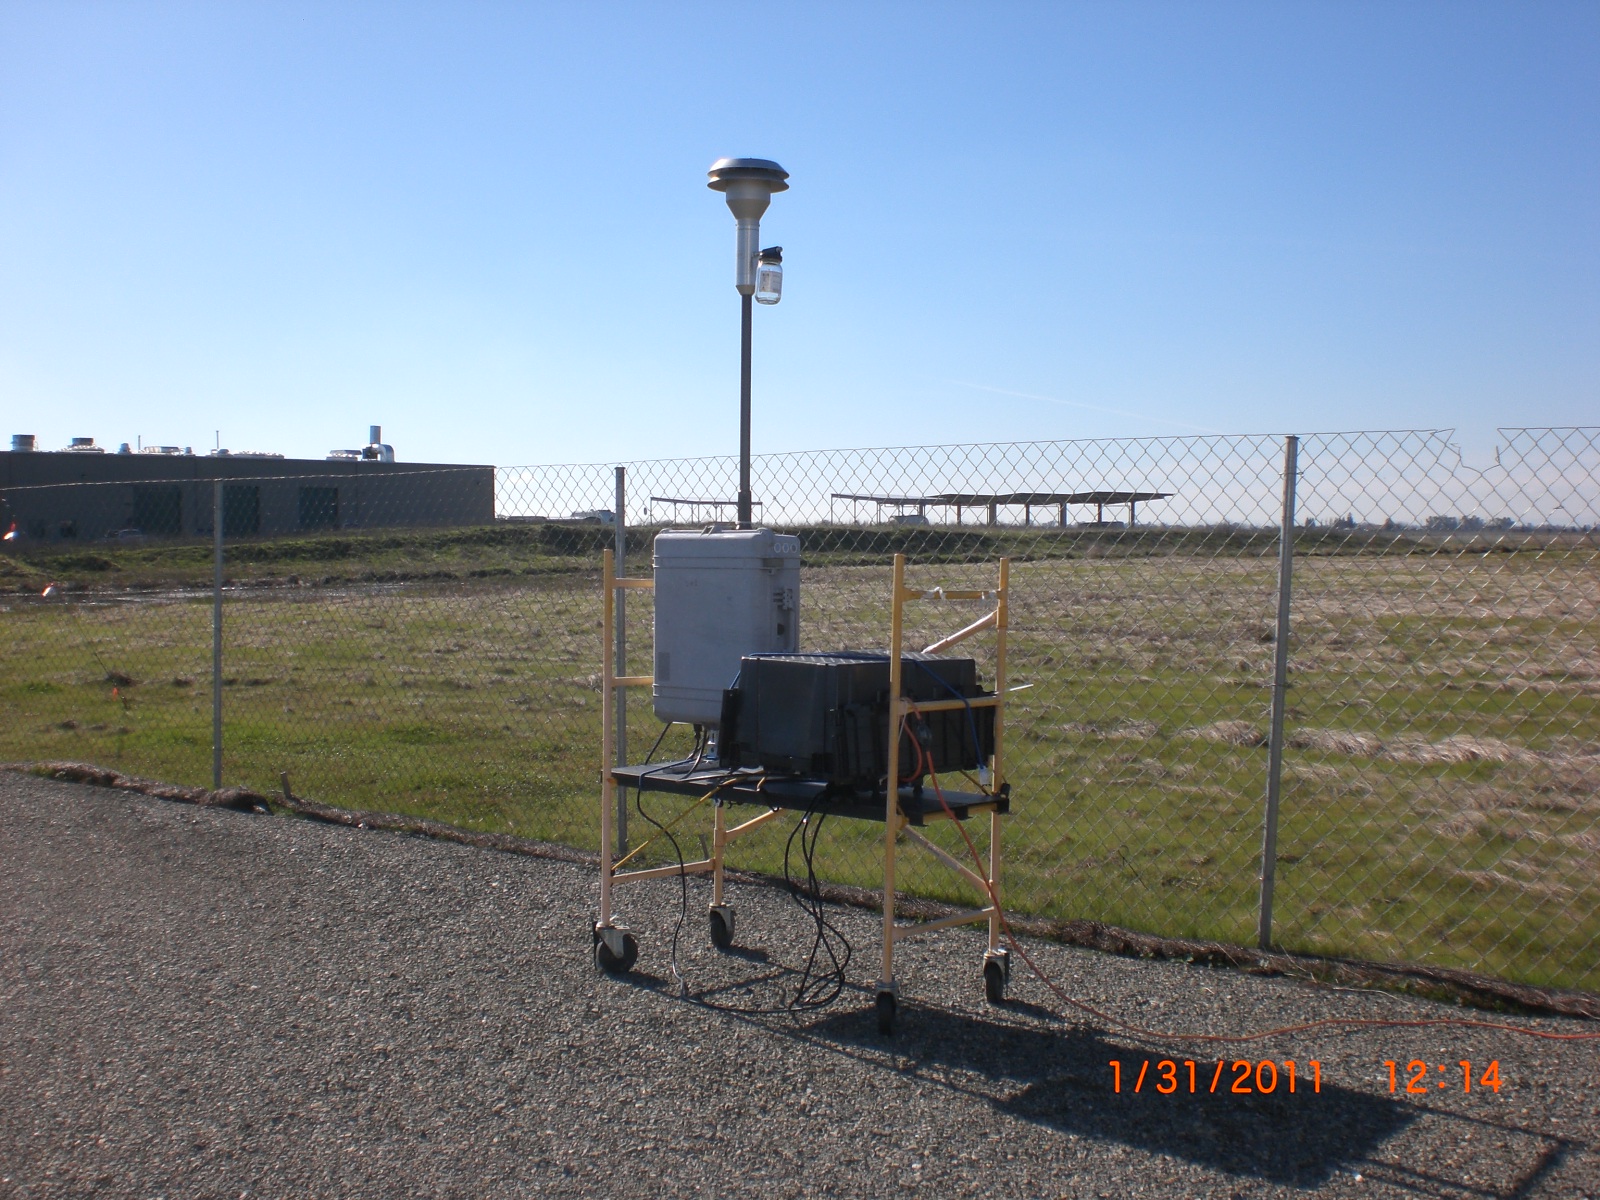 Image: a RDI sampler and stack inlet deployed at an airport.